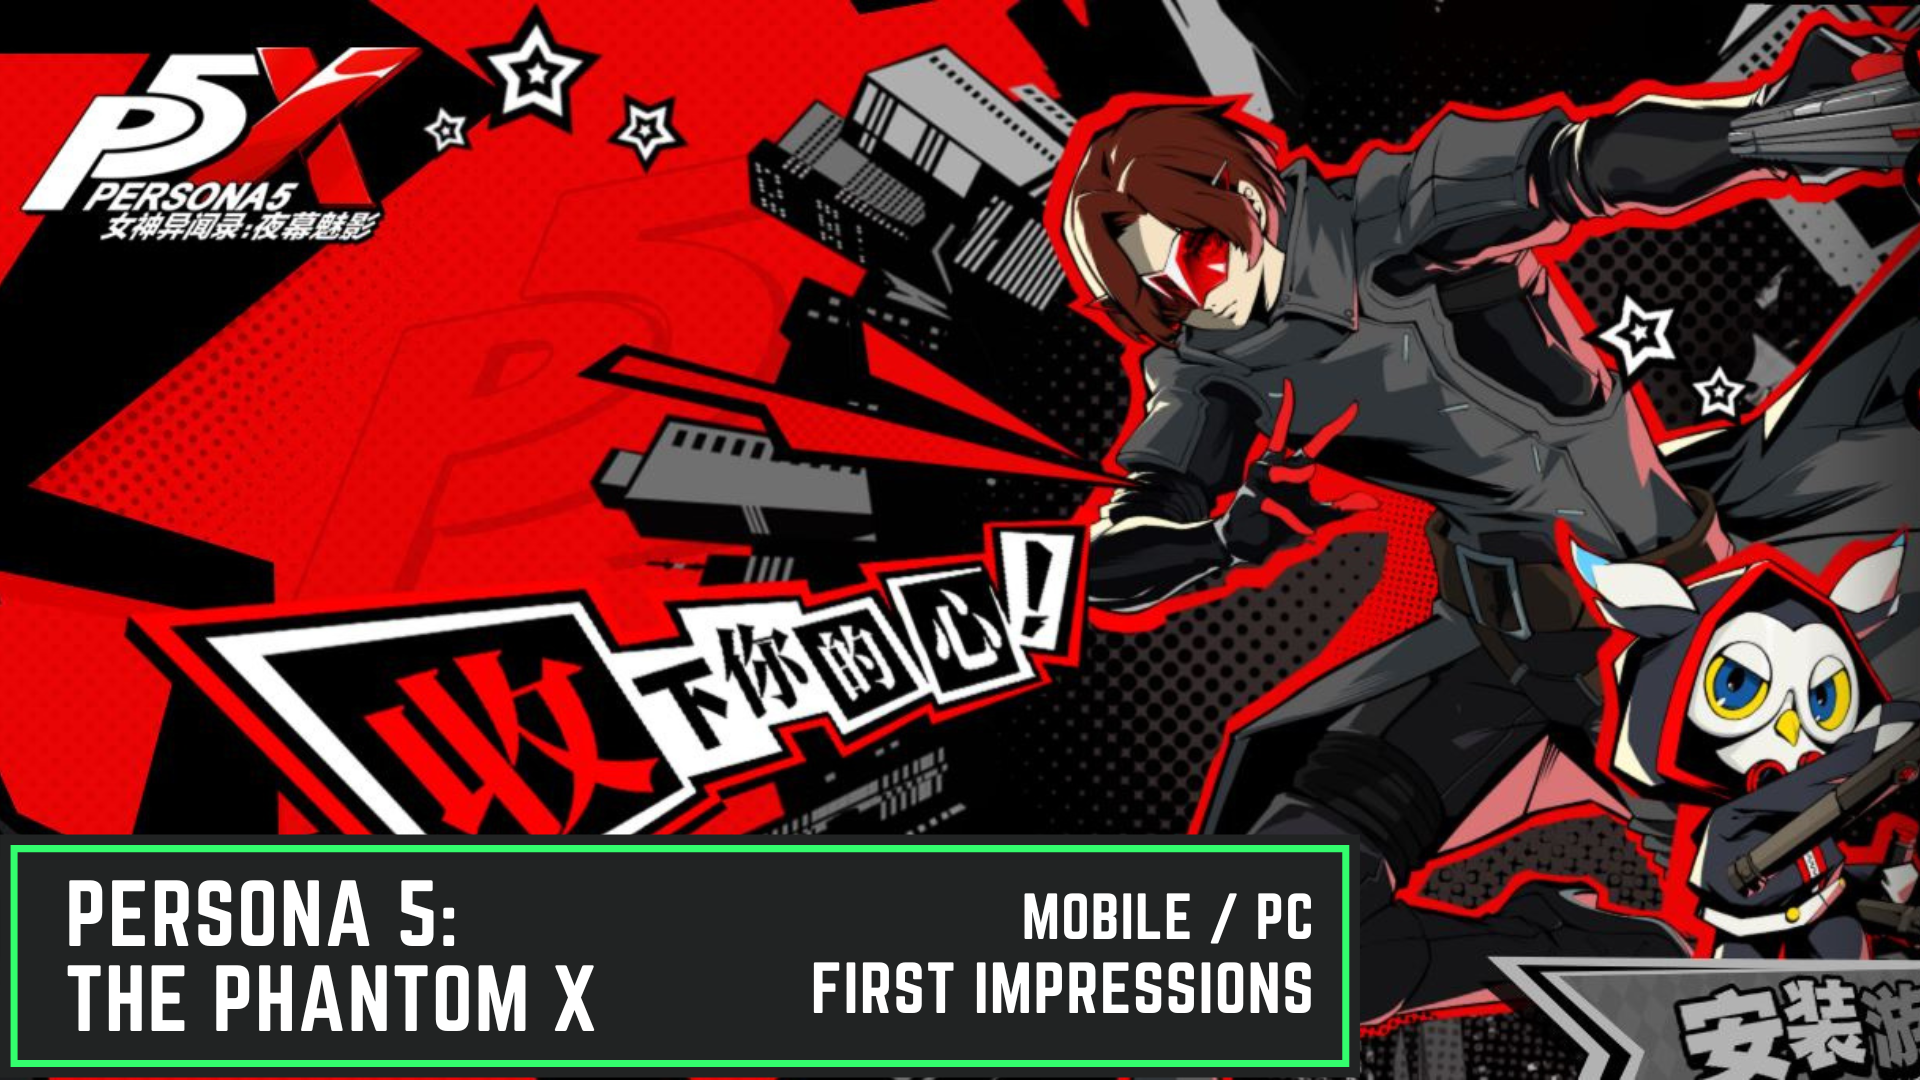 Persona 5: The Phantom X is an upcoming P5 mobile spinoff